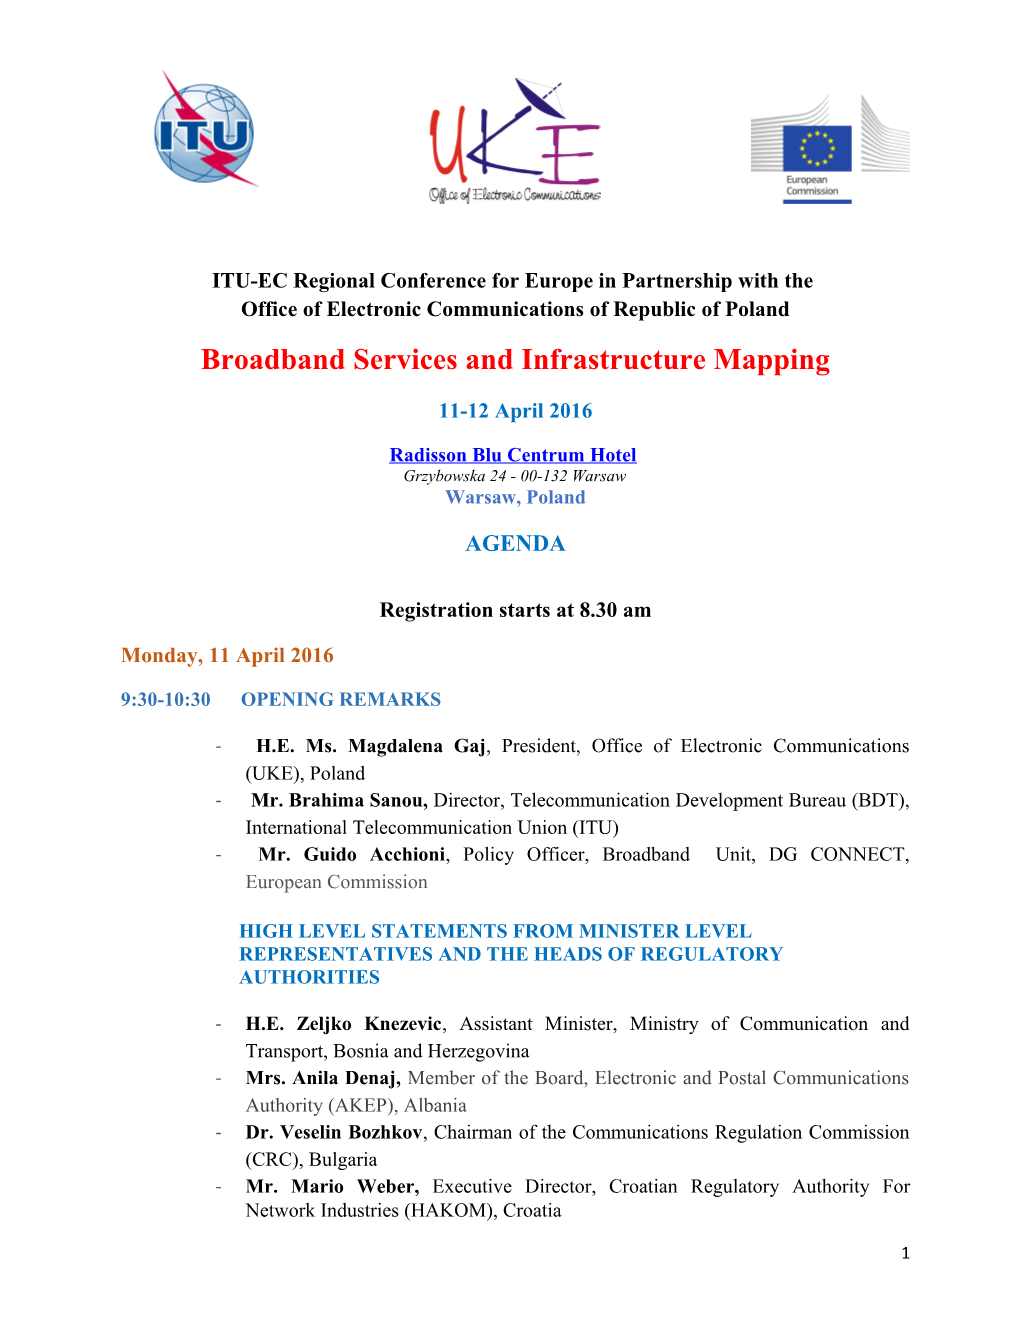 Broadband Services and Infrastructure Mapping